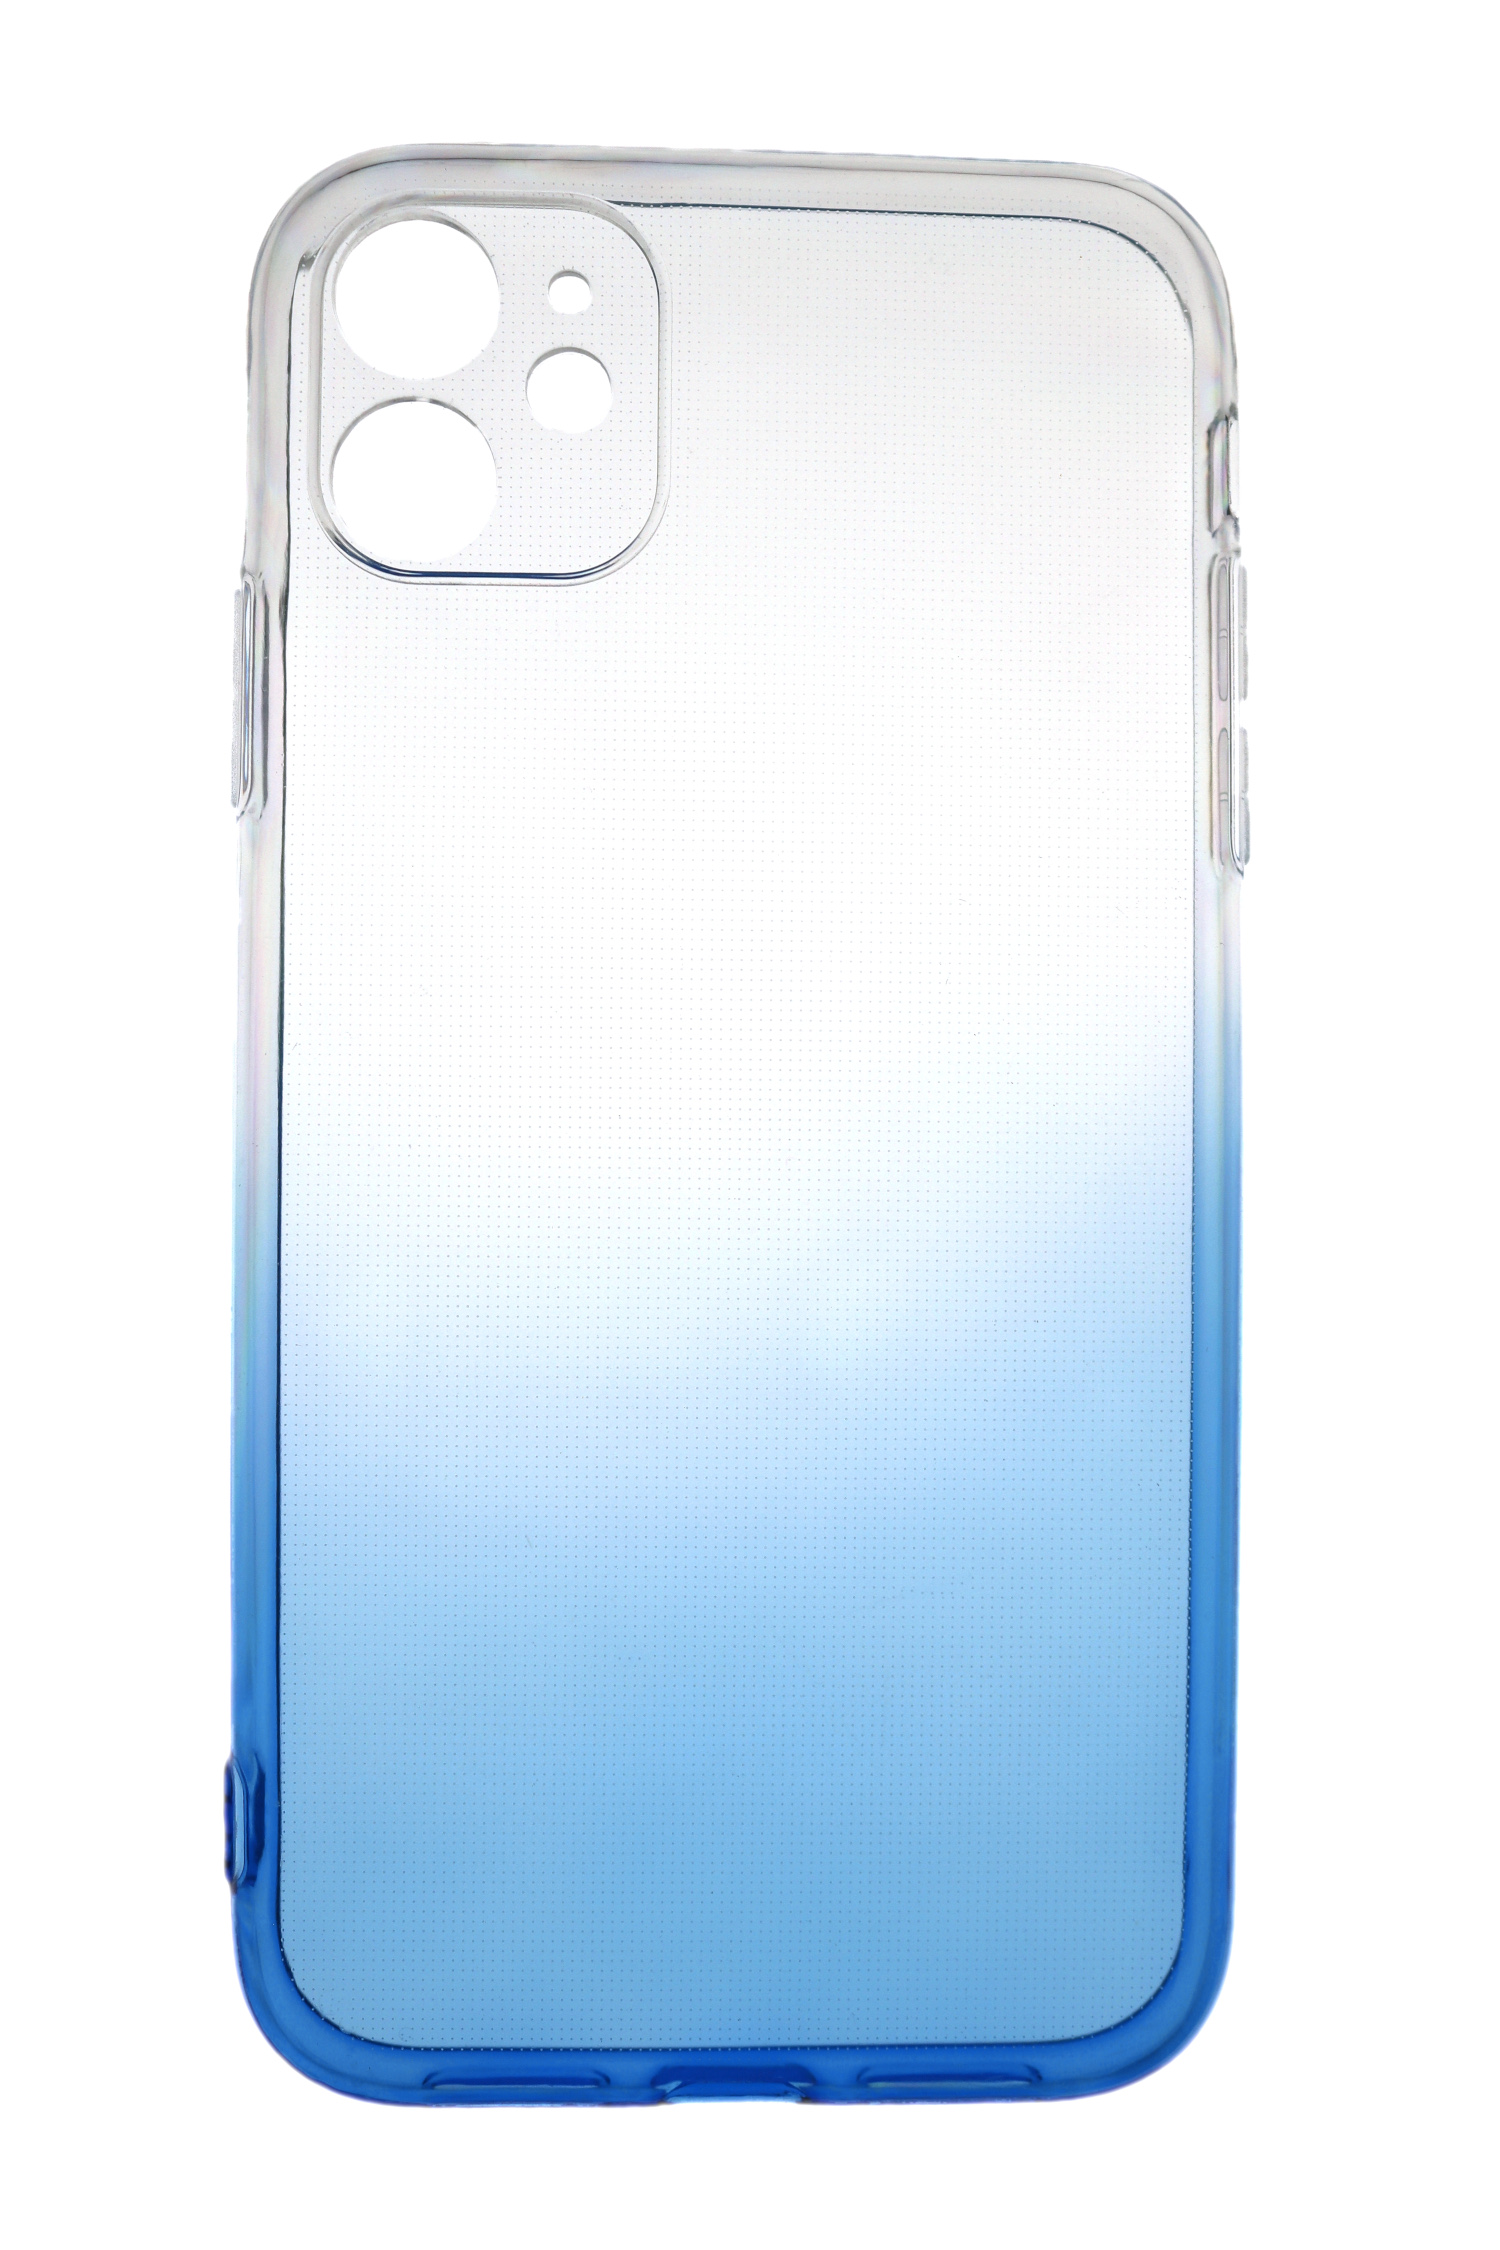 JAMCOVER 2.0 mm Backcover, Blau, Transparent iPhone Apple, iPhone TPU Case Pro, Strong, 12 12